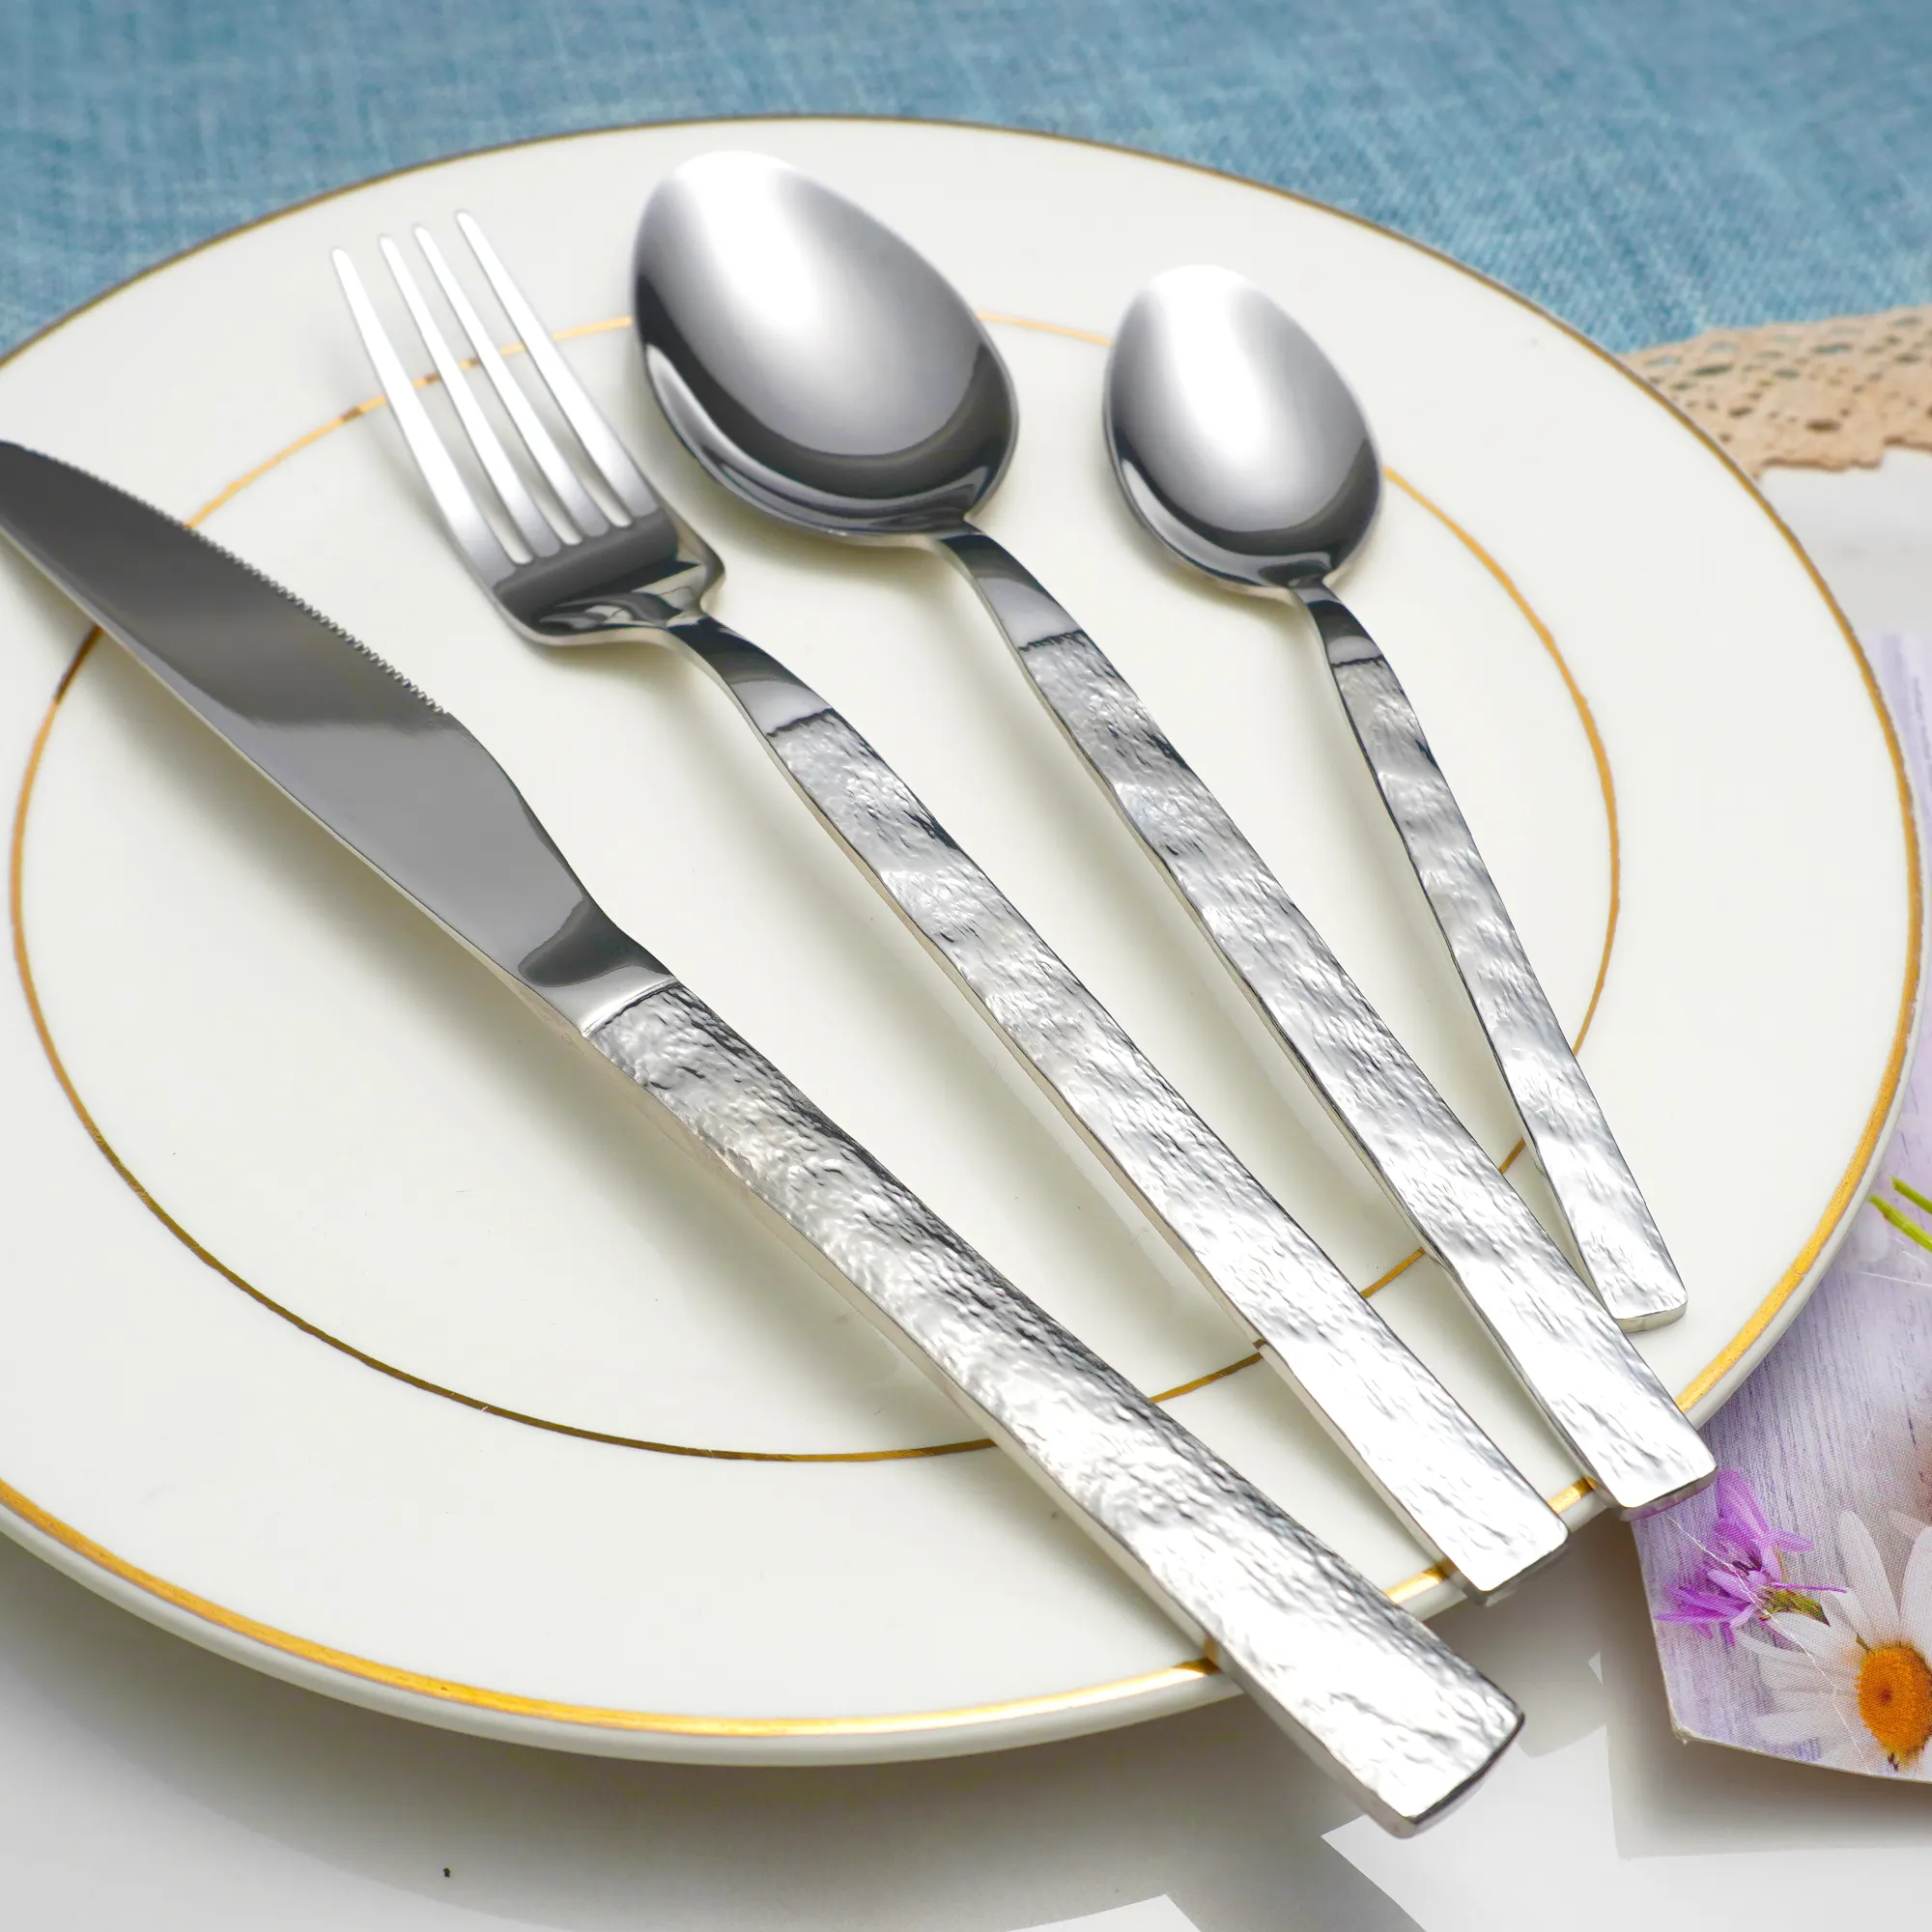 Wholesale Stone Pattern Silverware Stainless Steel Knife Fork And Spoon Flatware Silver Cutlery Set For Wedding